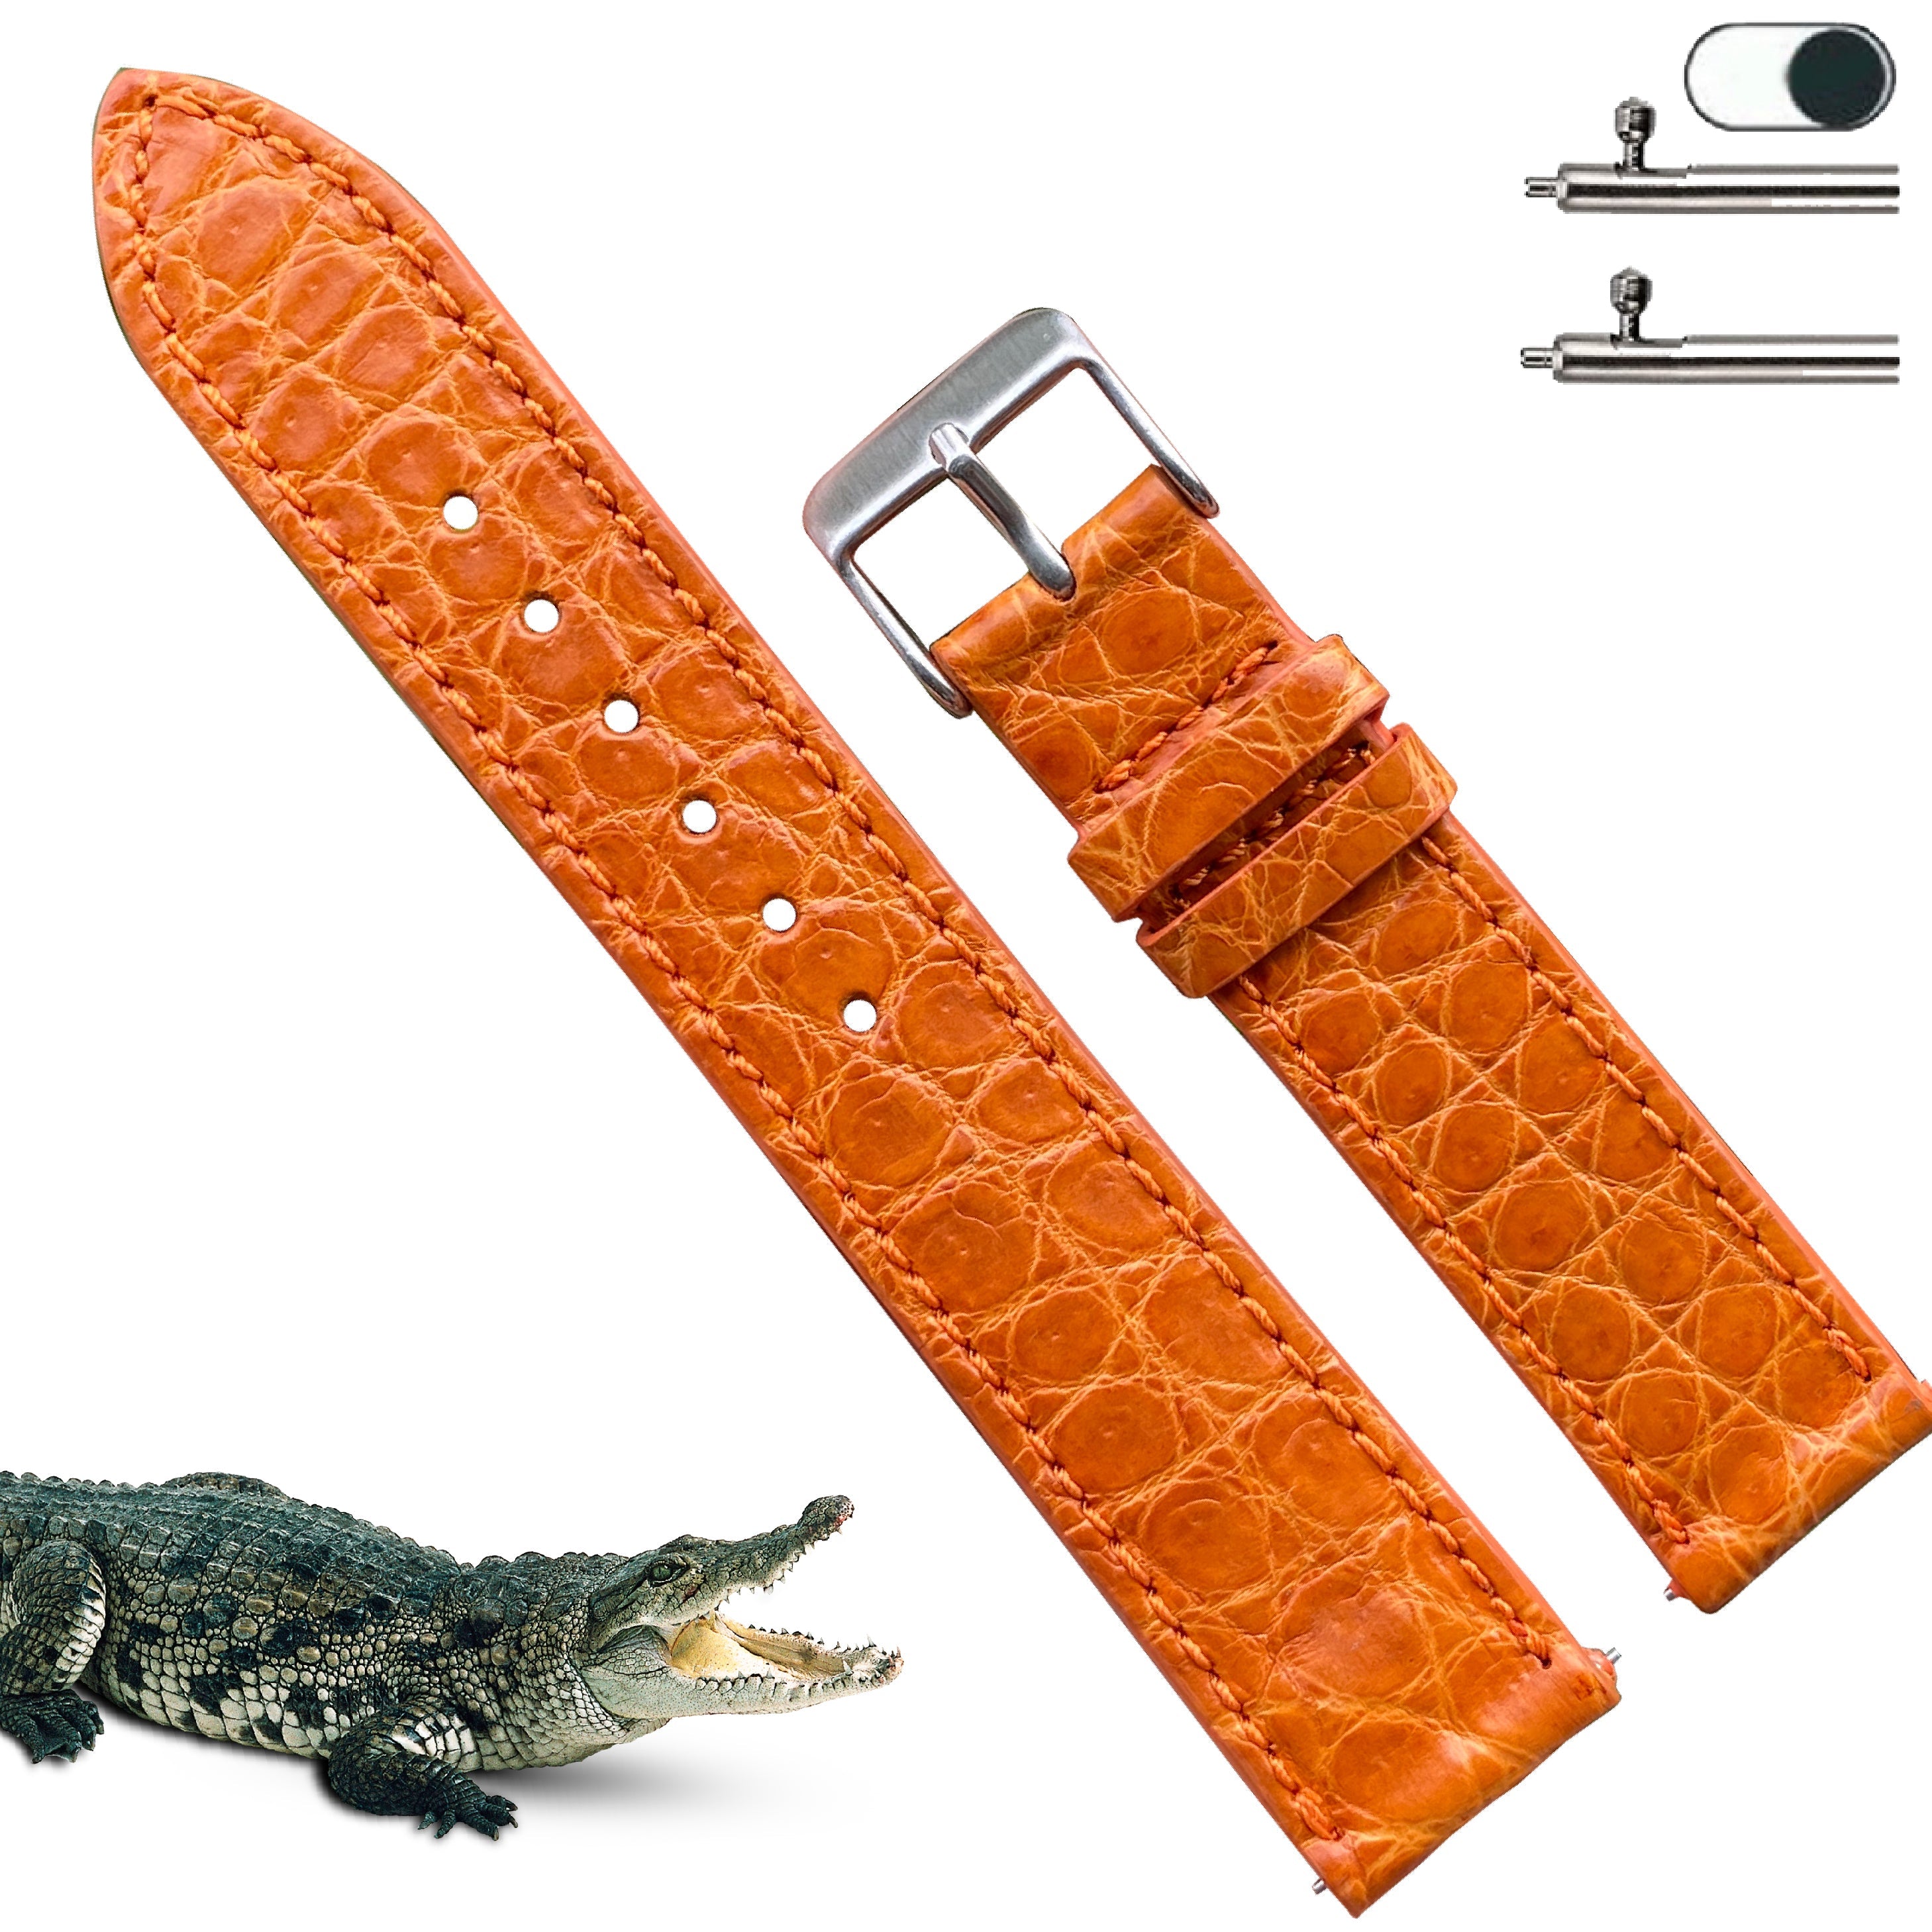 20mm Orange Carrot No-Padding Alligator Leather Watch Band | Flat Crocodile Skin Replacement Wristwatch Strap | DH-29 - Vinacreations